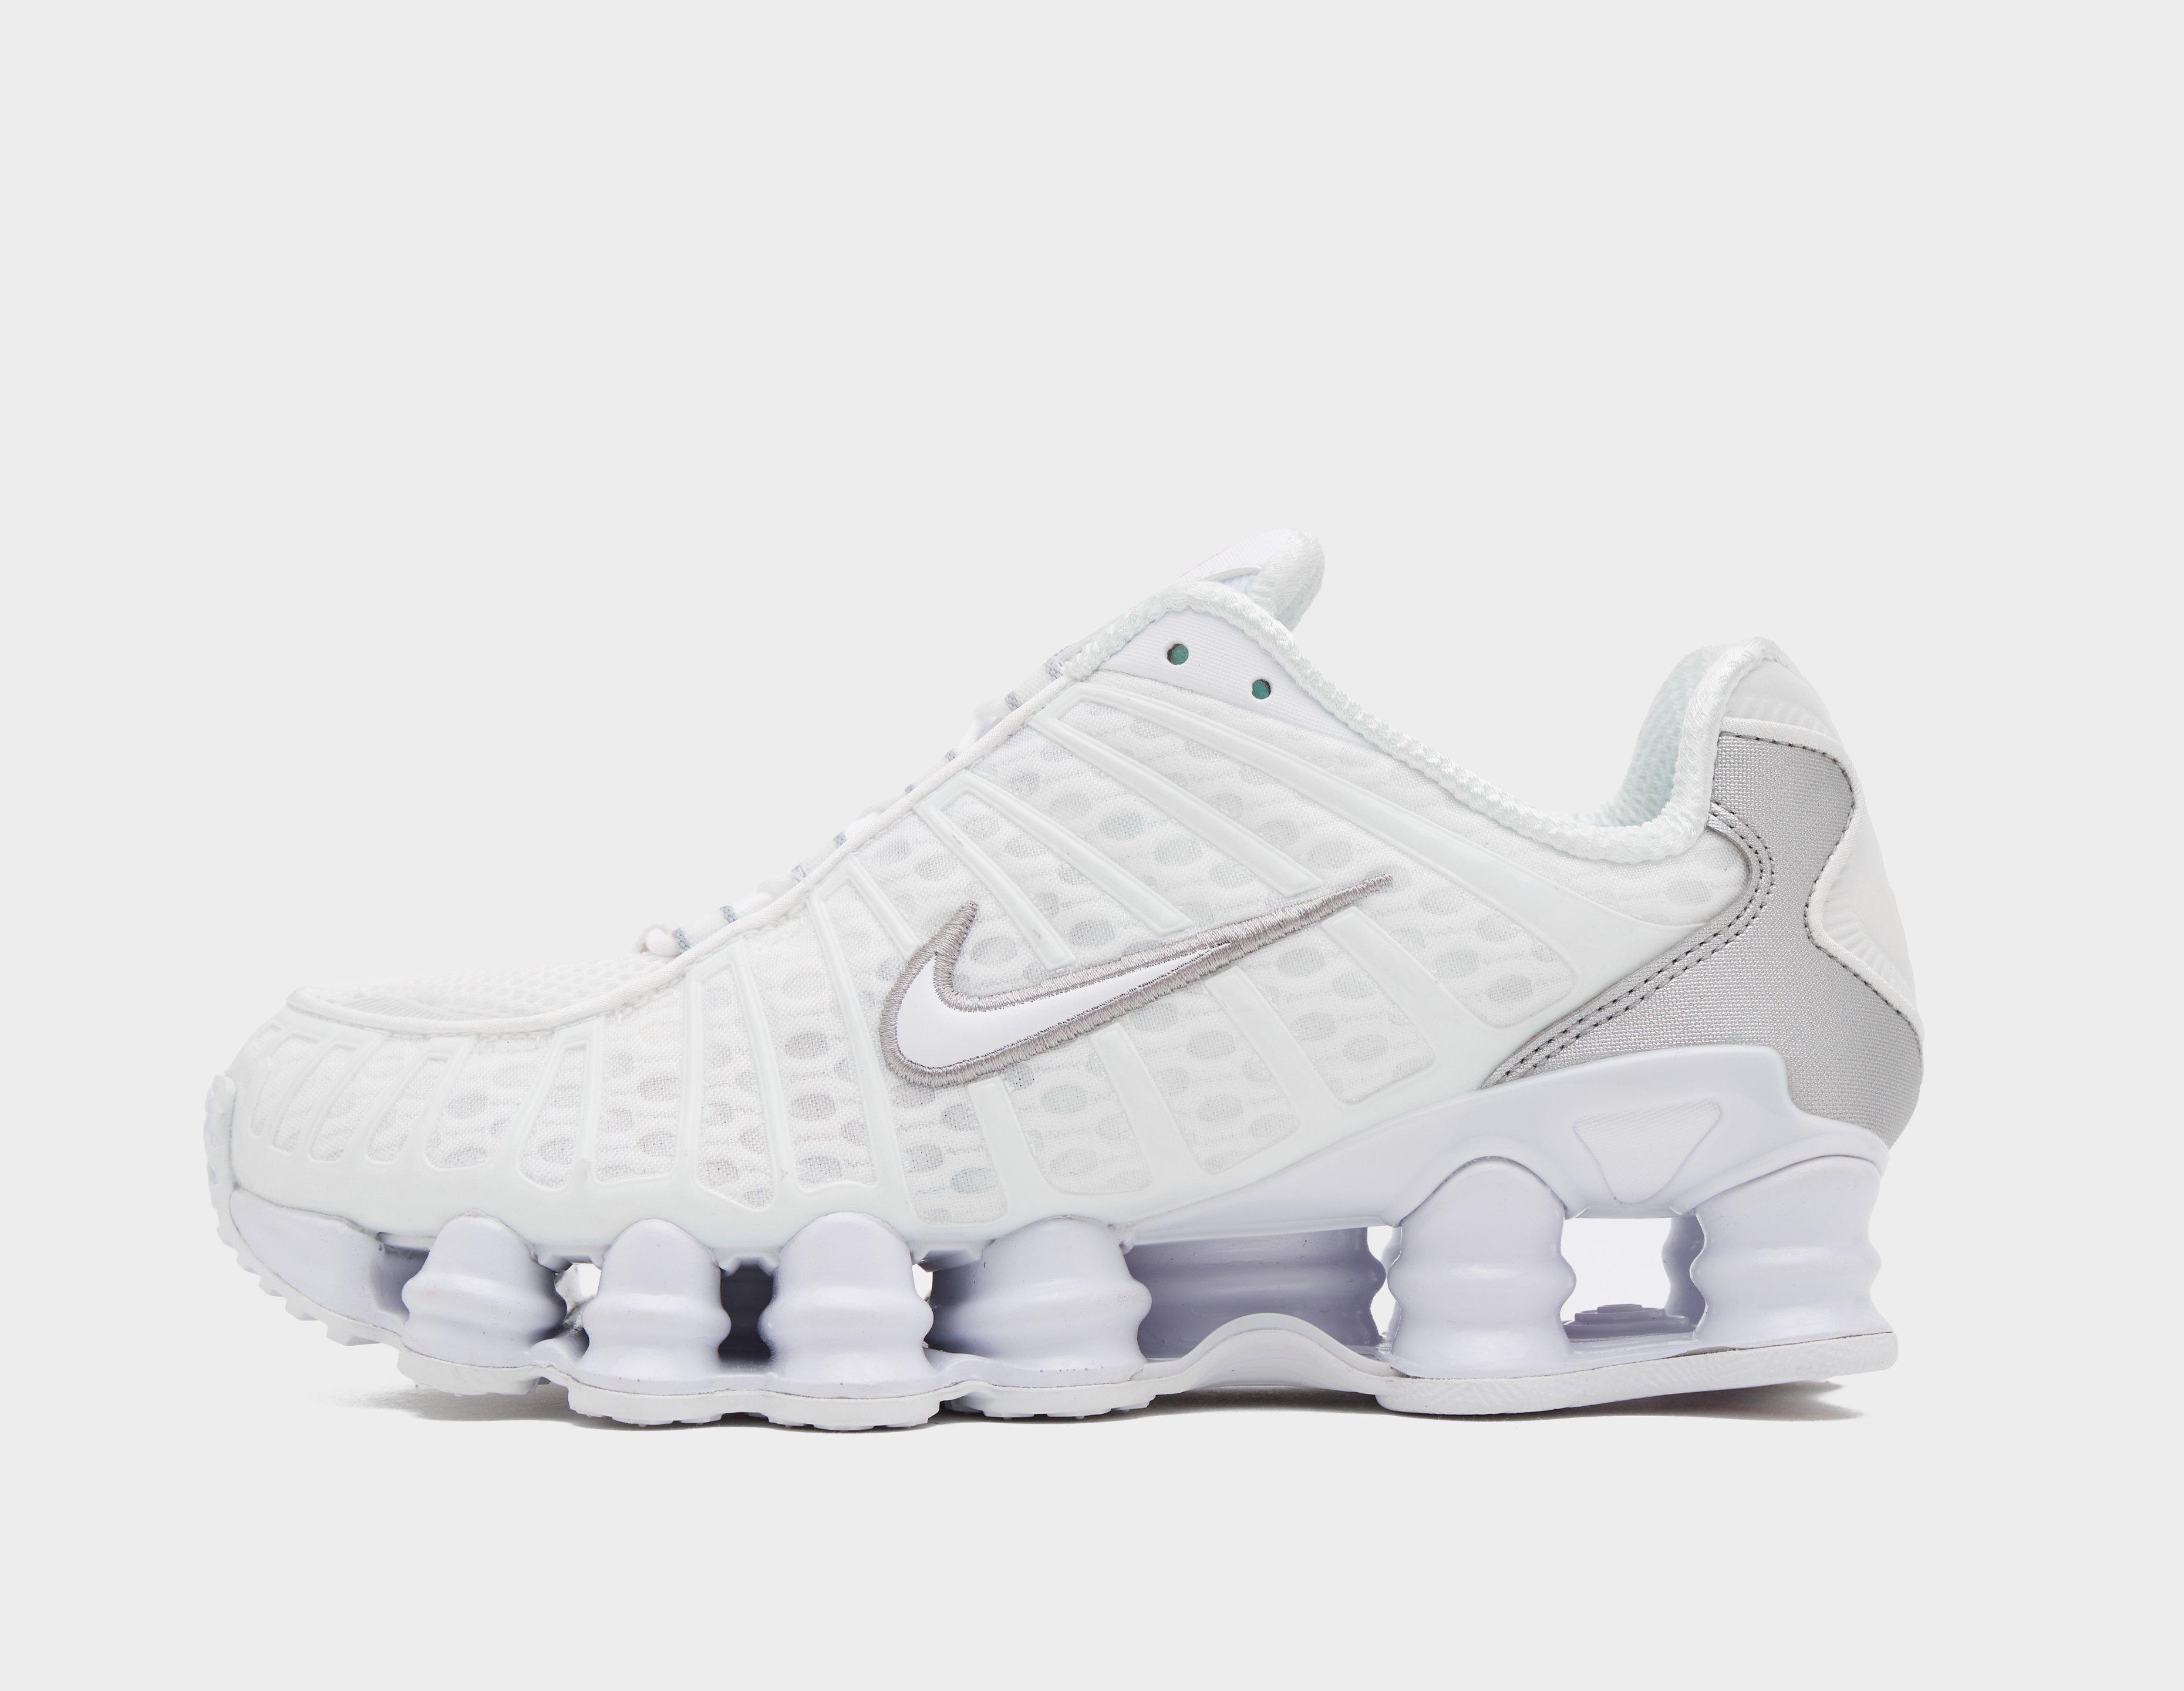 Nike Shox TL, review and details, From £ 155.00